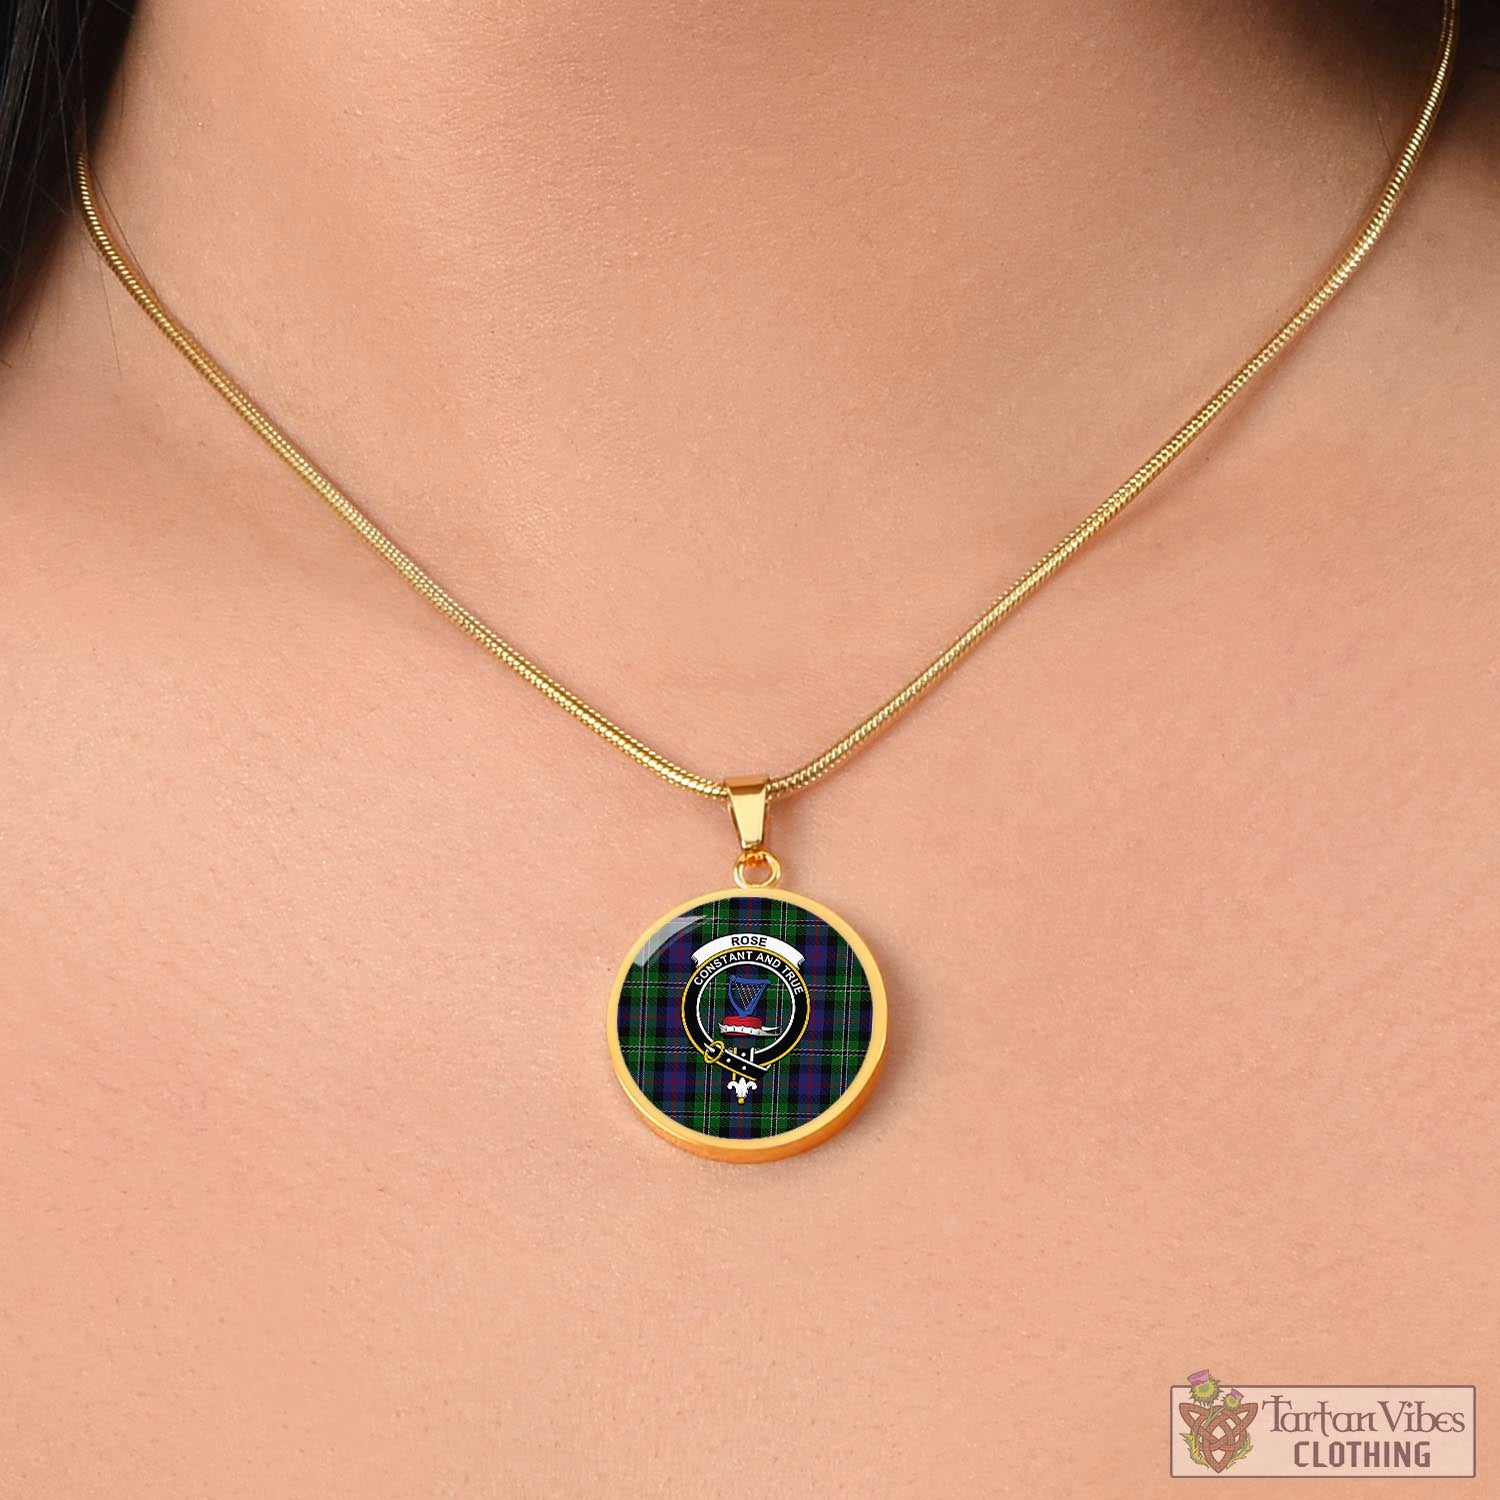 Tartan Vibes Clothing Rose Hunting Tartan Circle Necklace with Family Crest